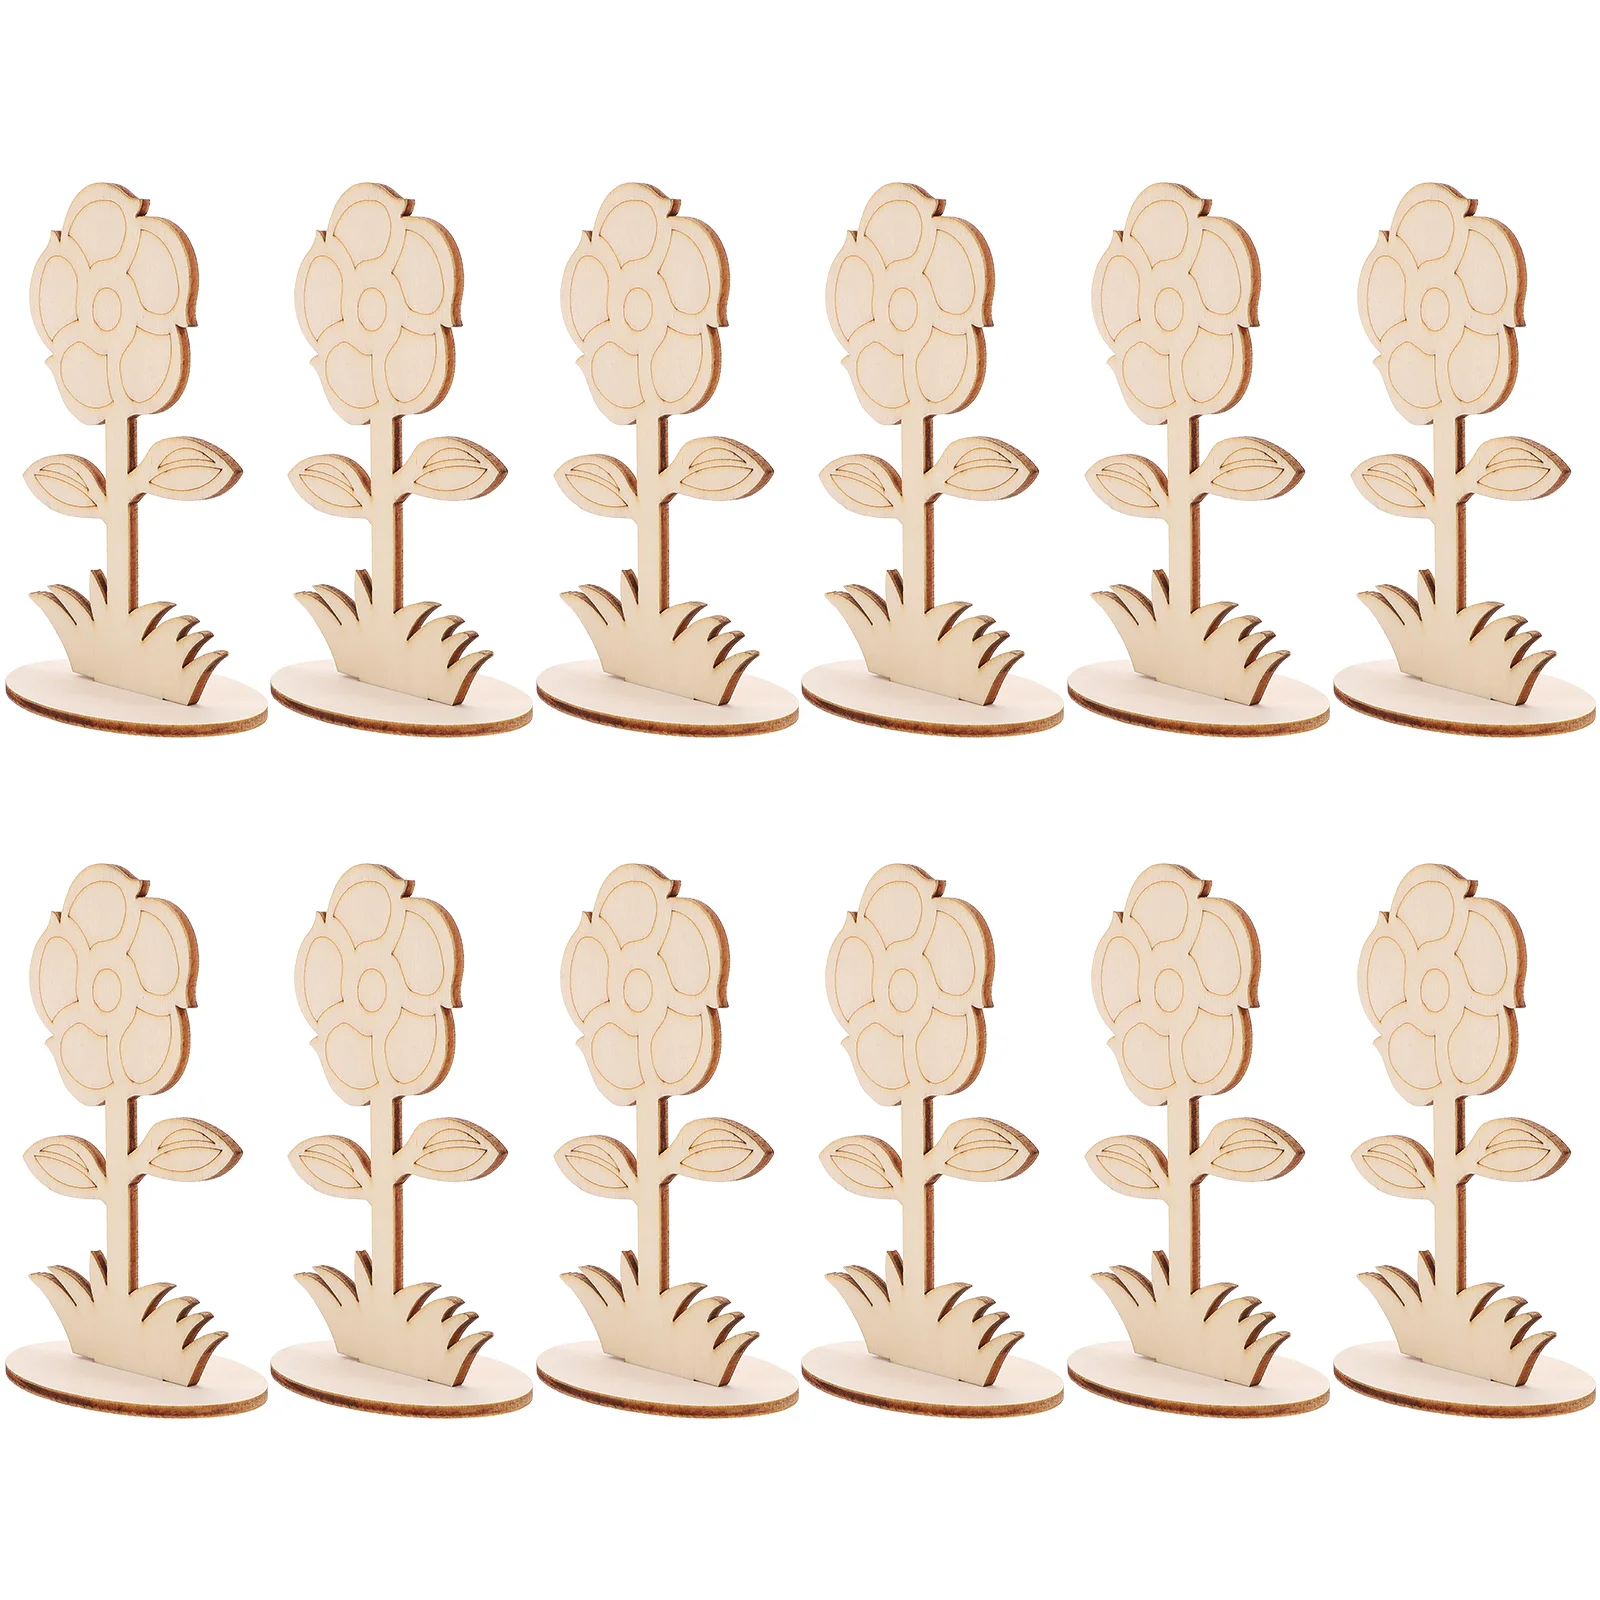 

12 Pcs Wooden Flowers Stems Blank Crafts Kid Toys Unfinished Cutouts Your Own Ornaments